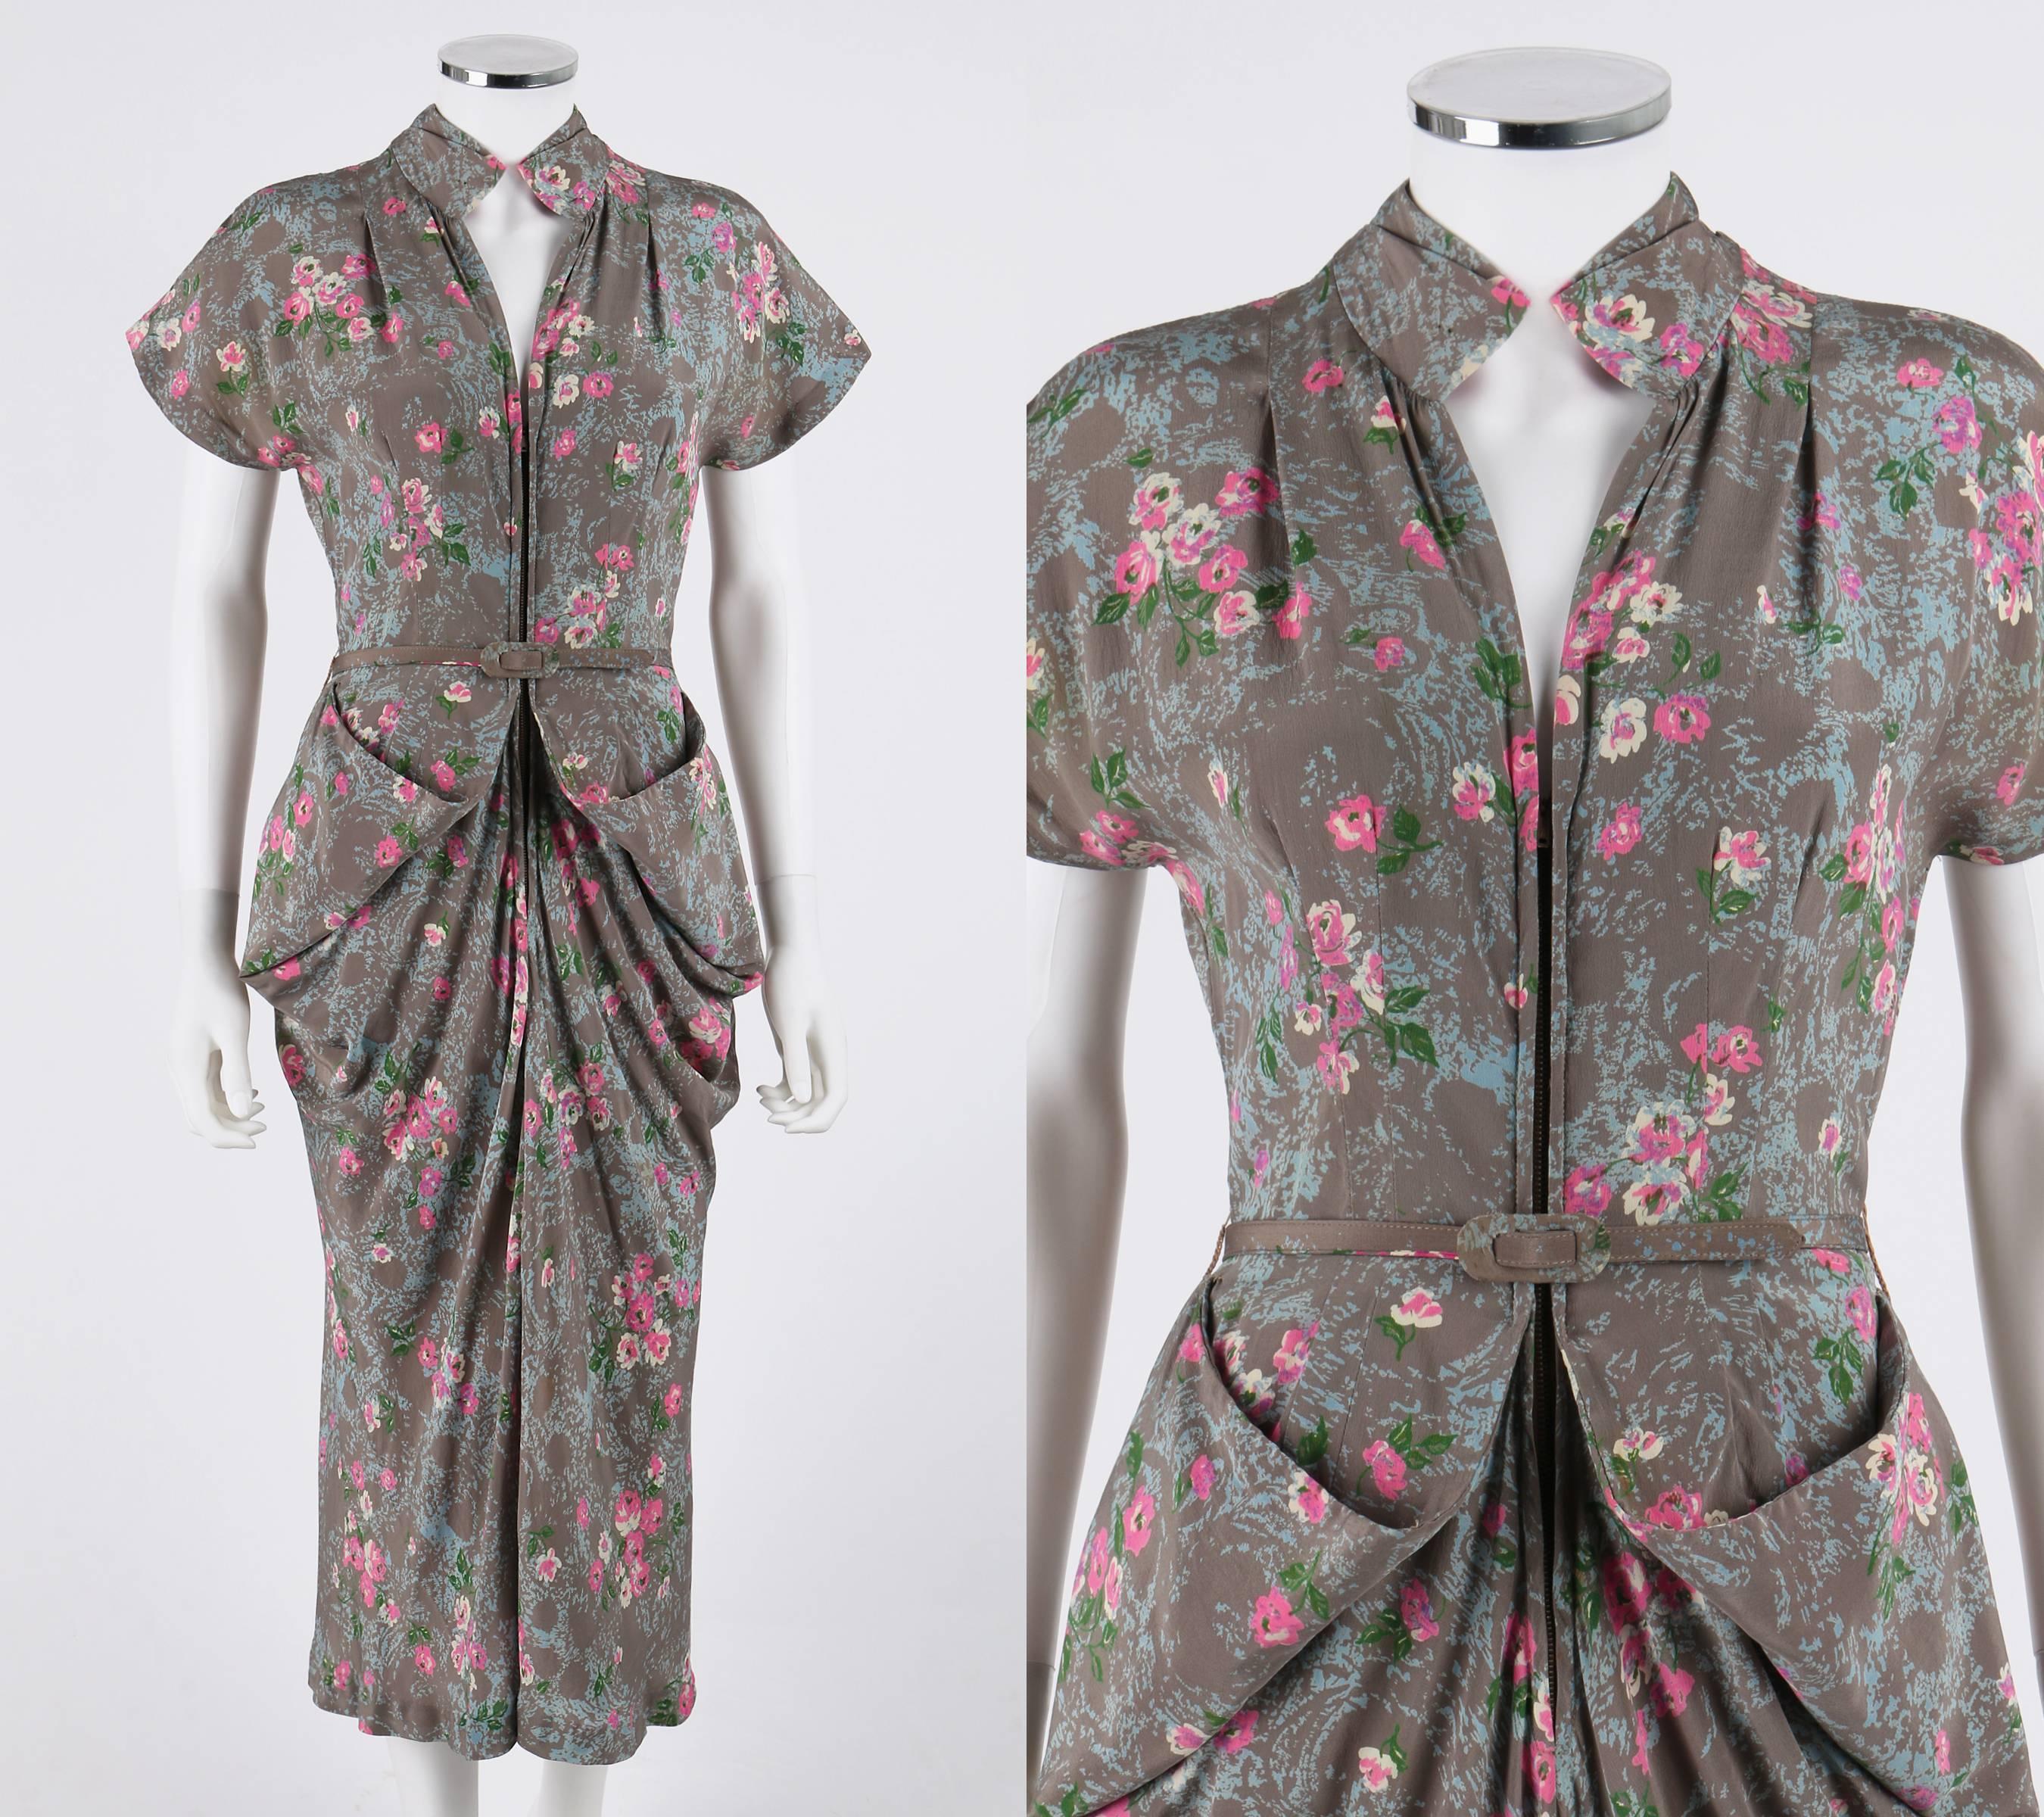 Vintage Couture c.1940's gray floral print silk day dress. Gray, light blue, pink, white, and green floral print silk. Extended shoulders. V-neckline. Stylized mandarin collar. Front shoulder pleats. Center front metal zipper closure. Bust line